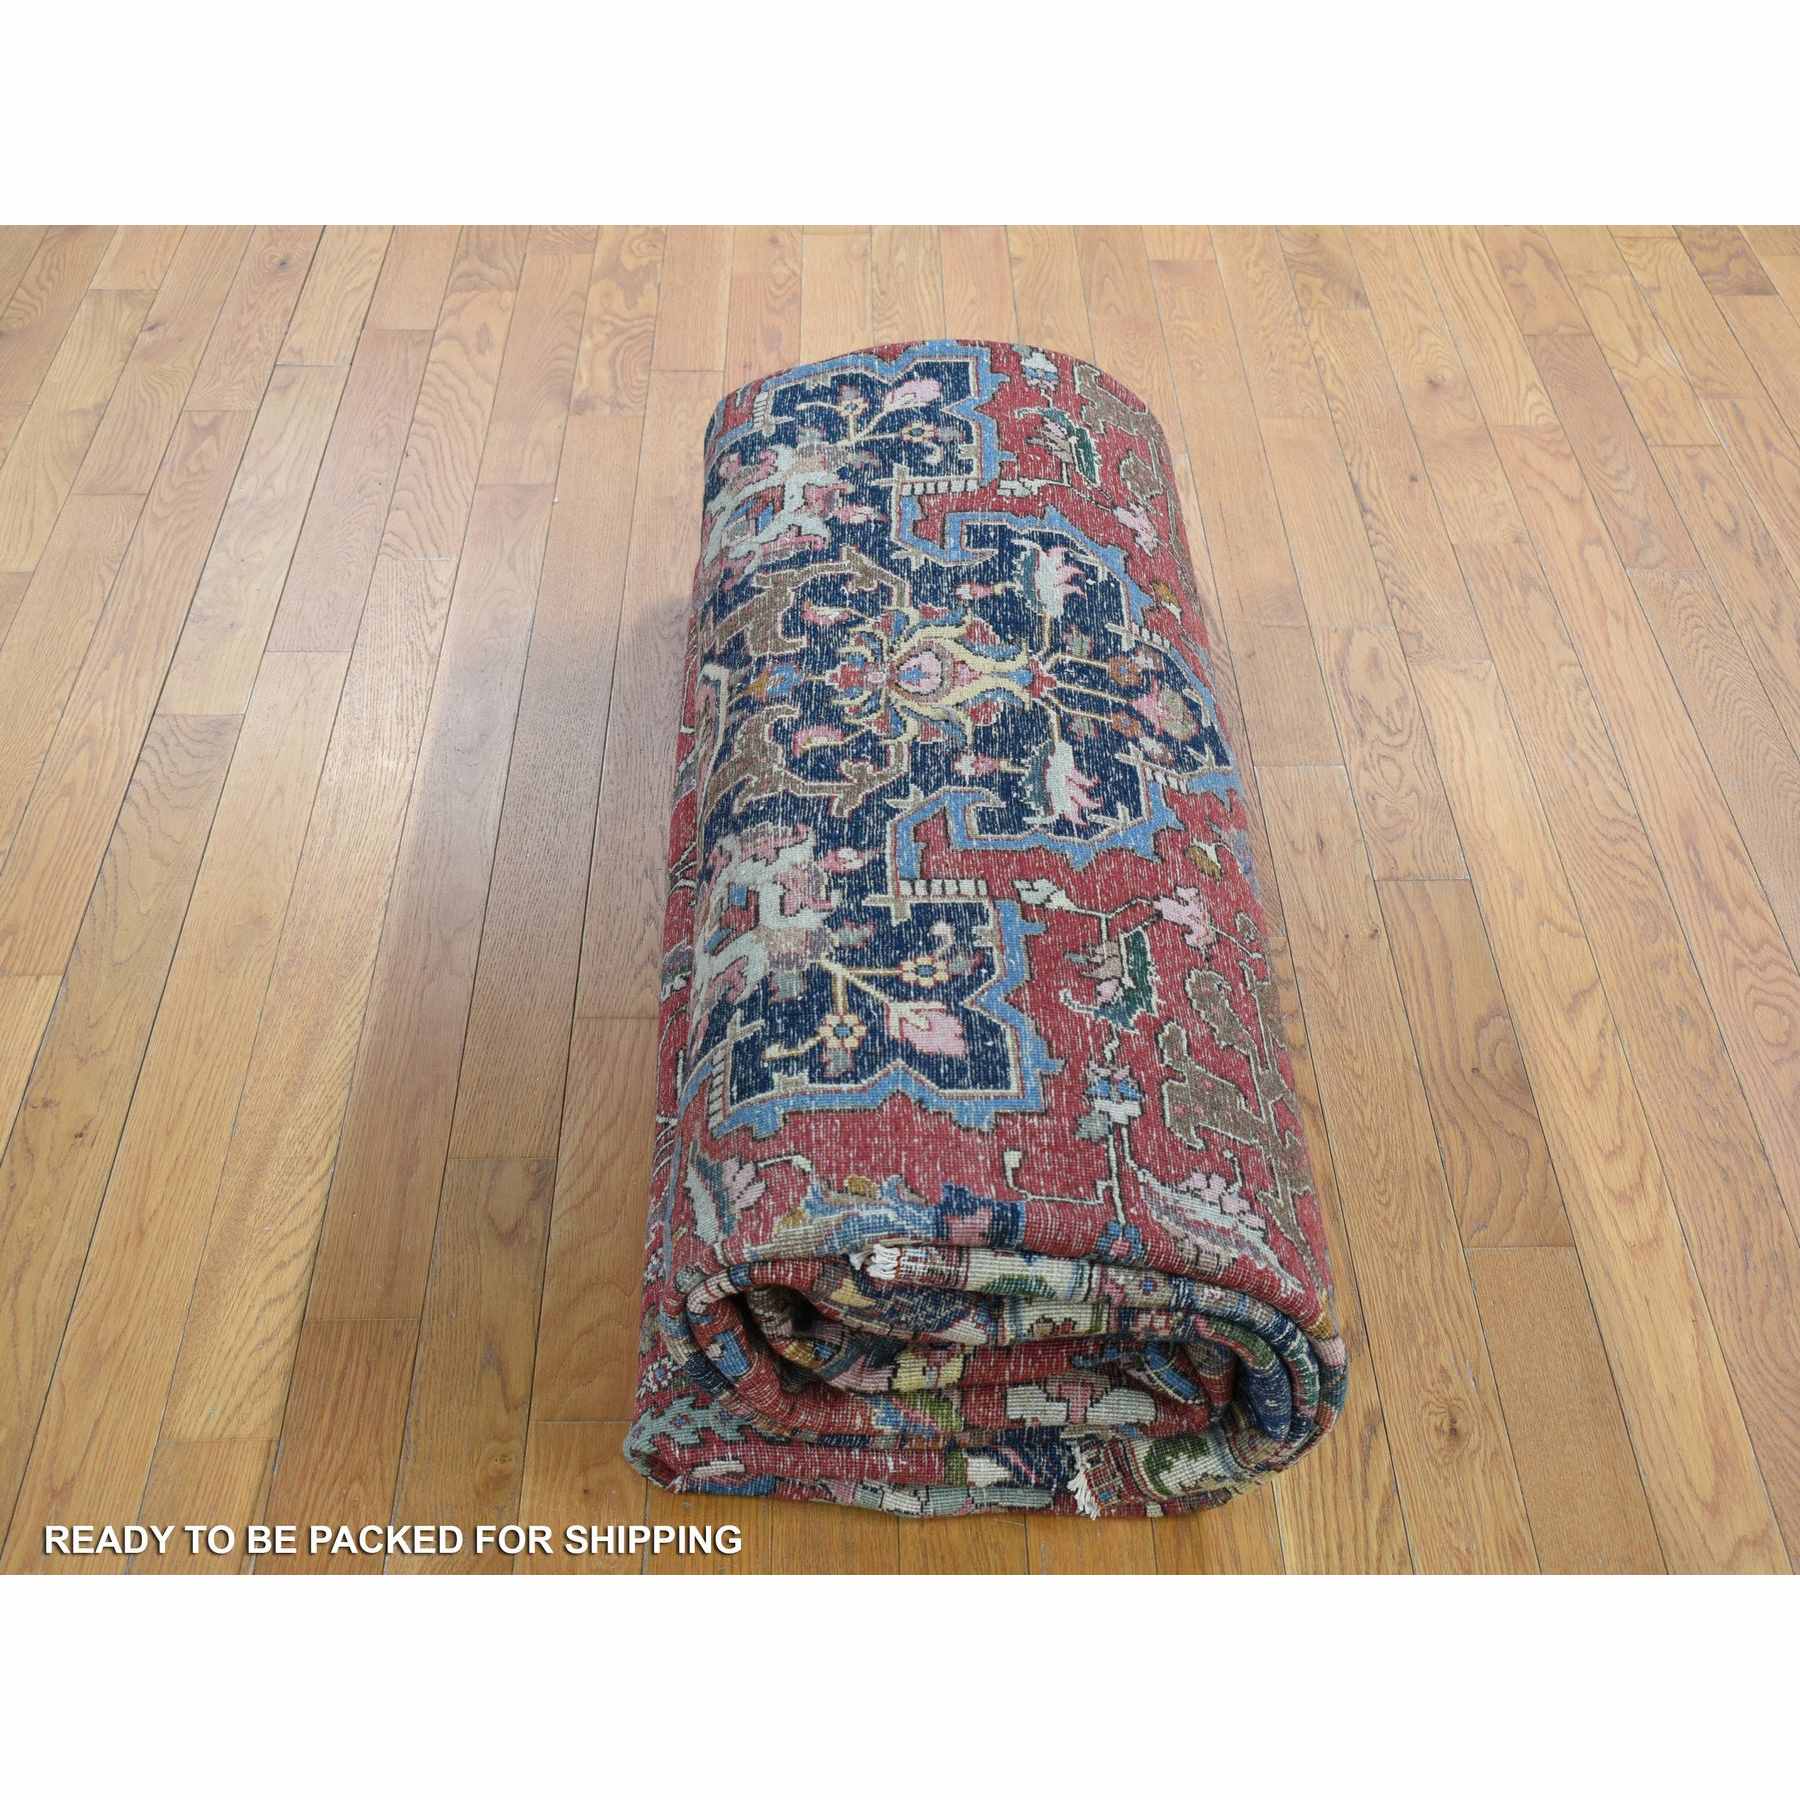 Antique-Hand-Knotted-Rug-401320